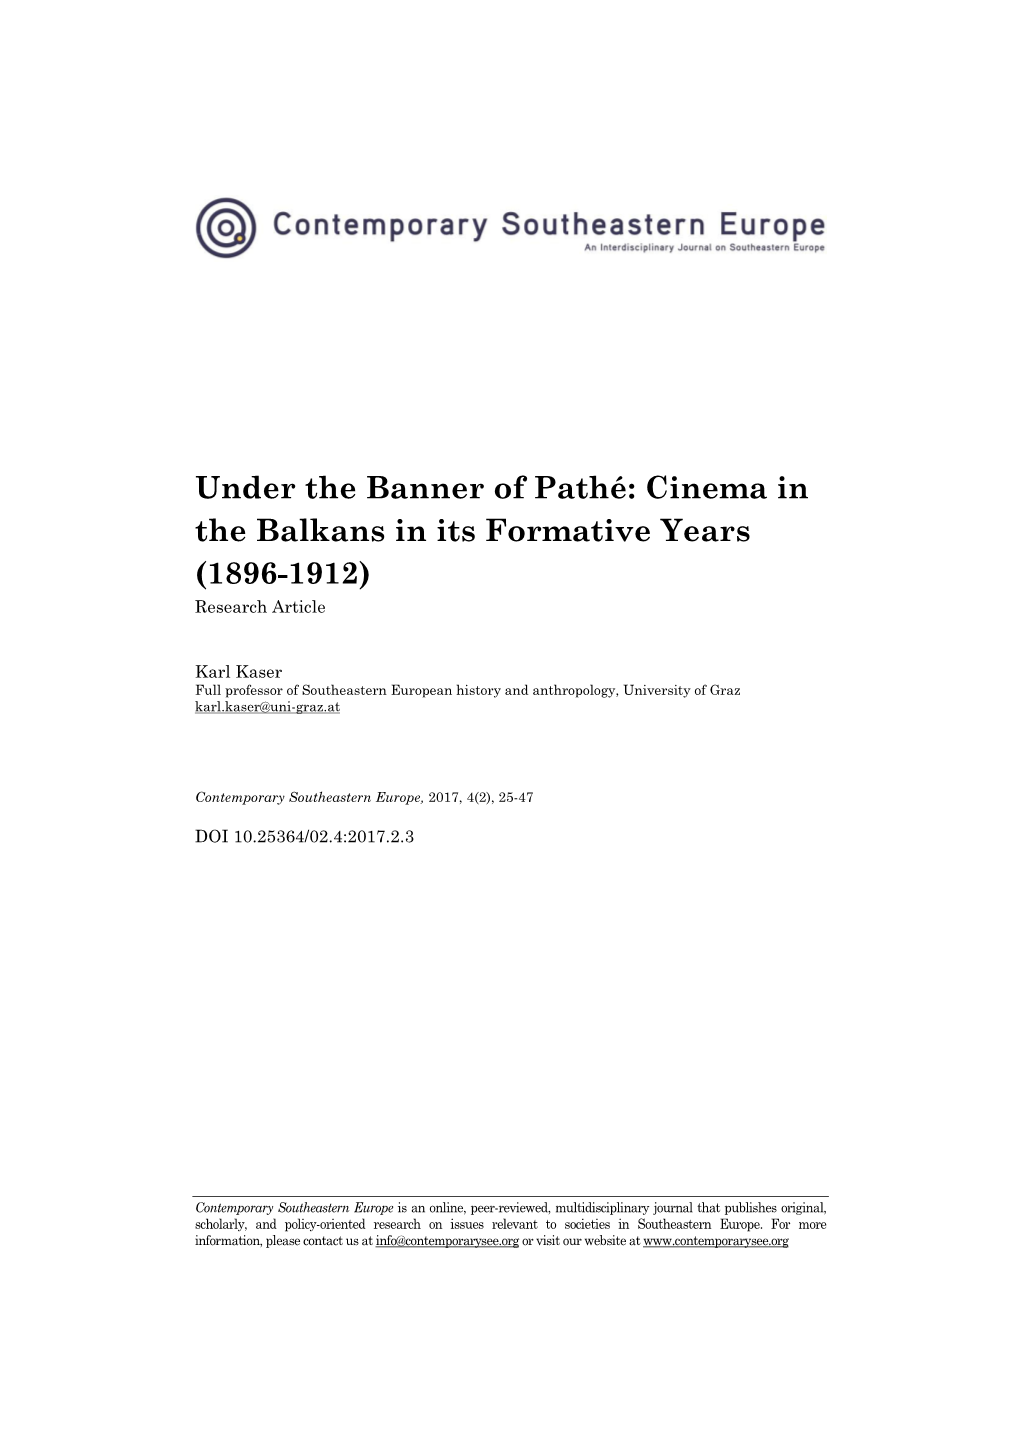 Under the Banner of Pathé: Cinema in the Balkans in Its Formative Years (1896-1912) Research Article